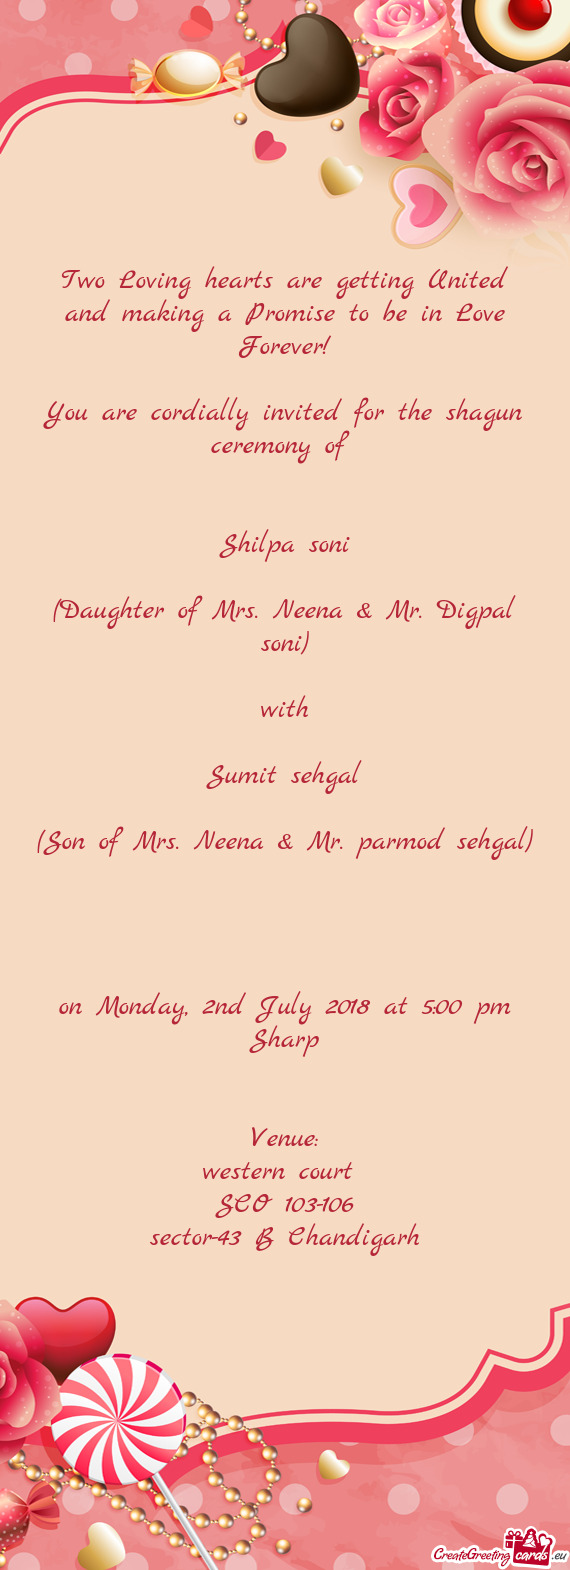 You are cordially invited for the shagun ceremony of